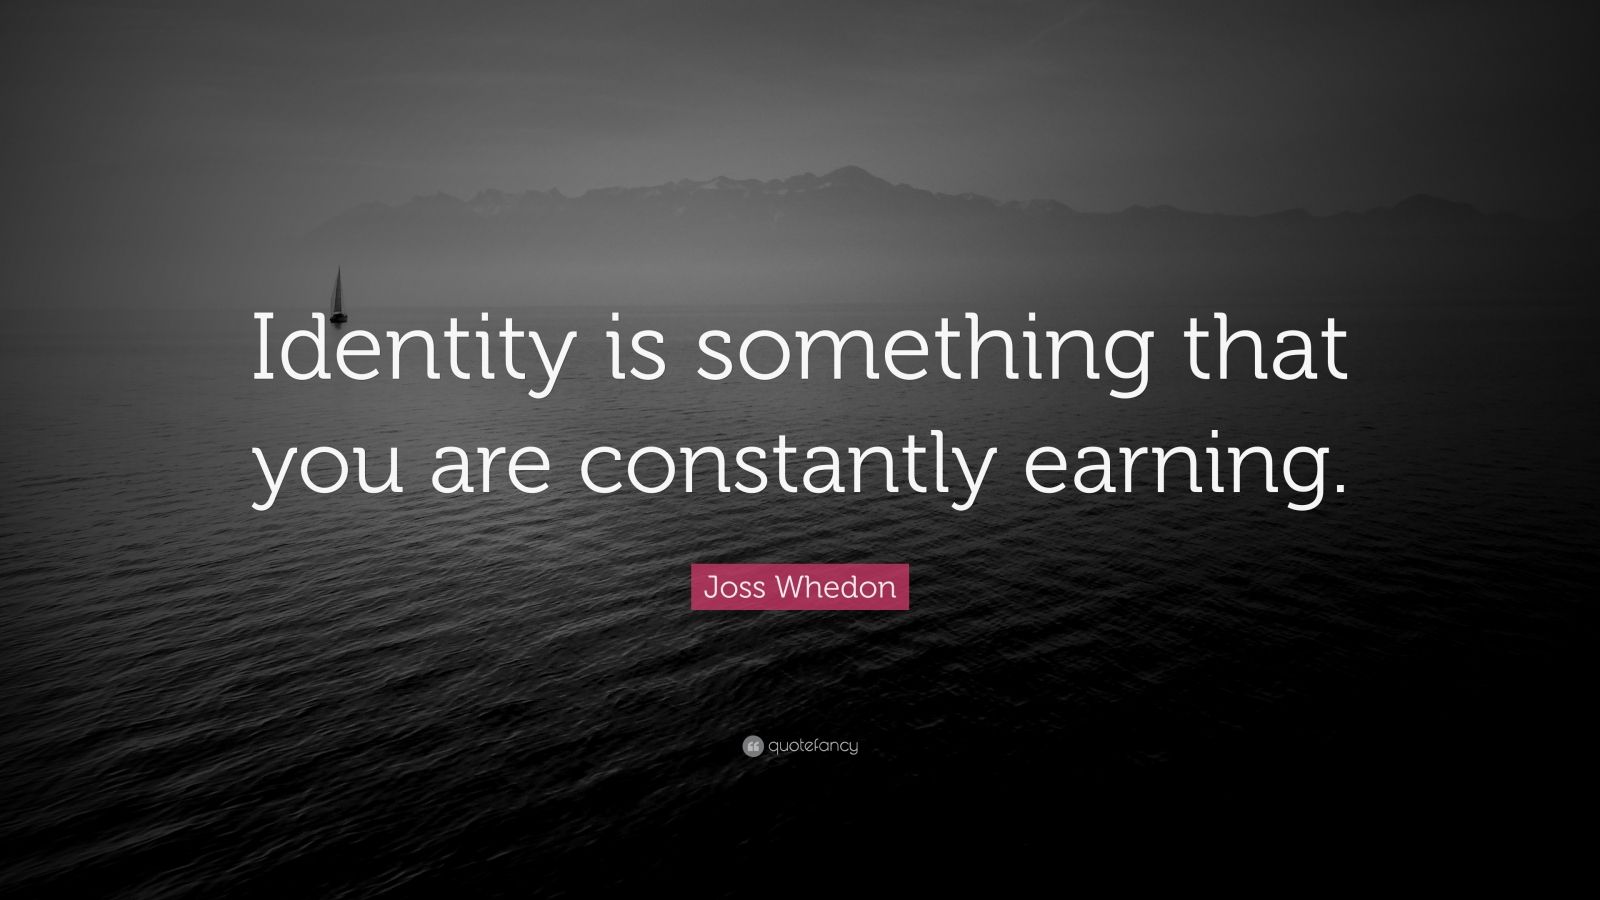 Joss Whedon Quote “identity Is Something That You Are Constantly Earning” 9 Wallpapers 